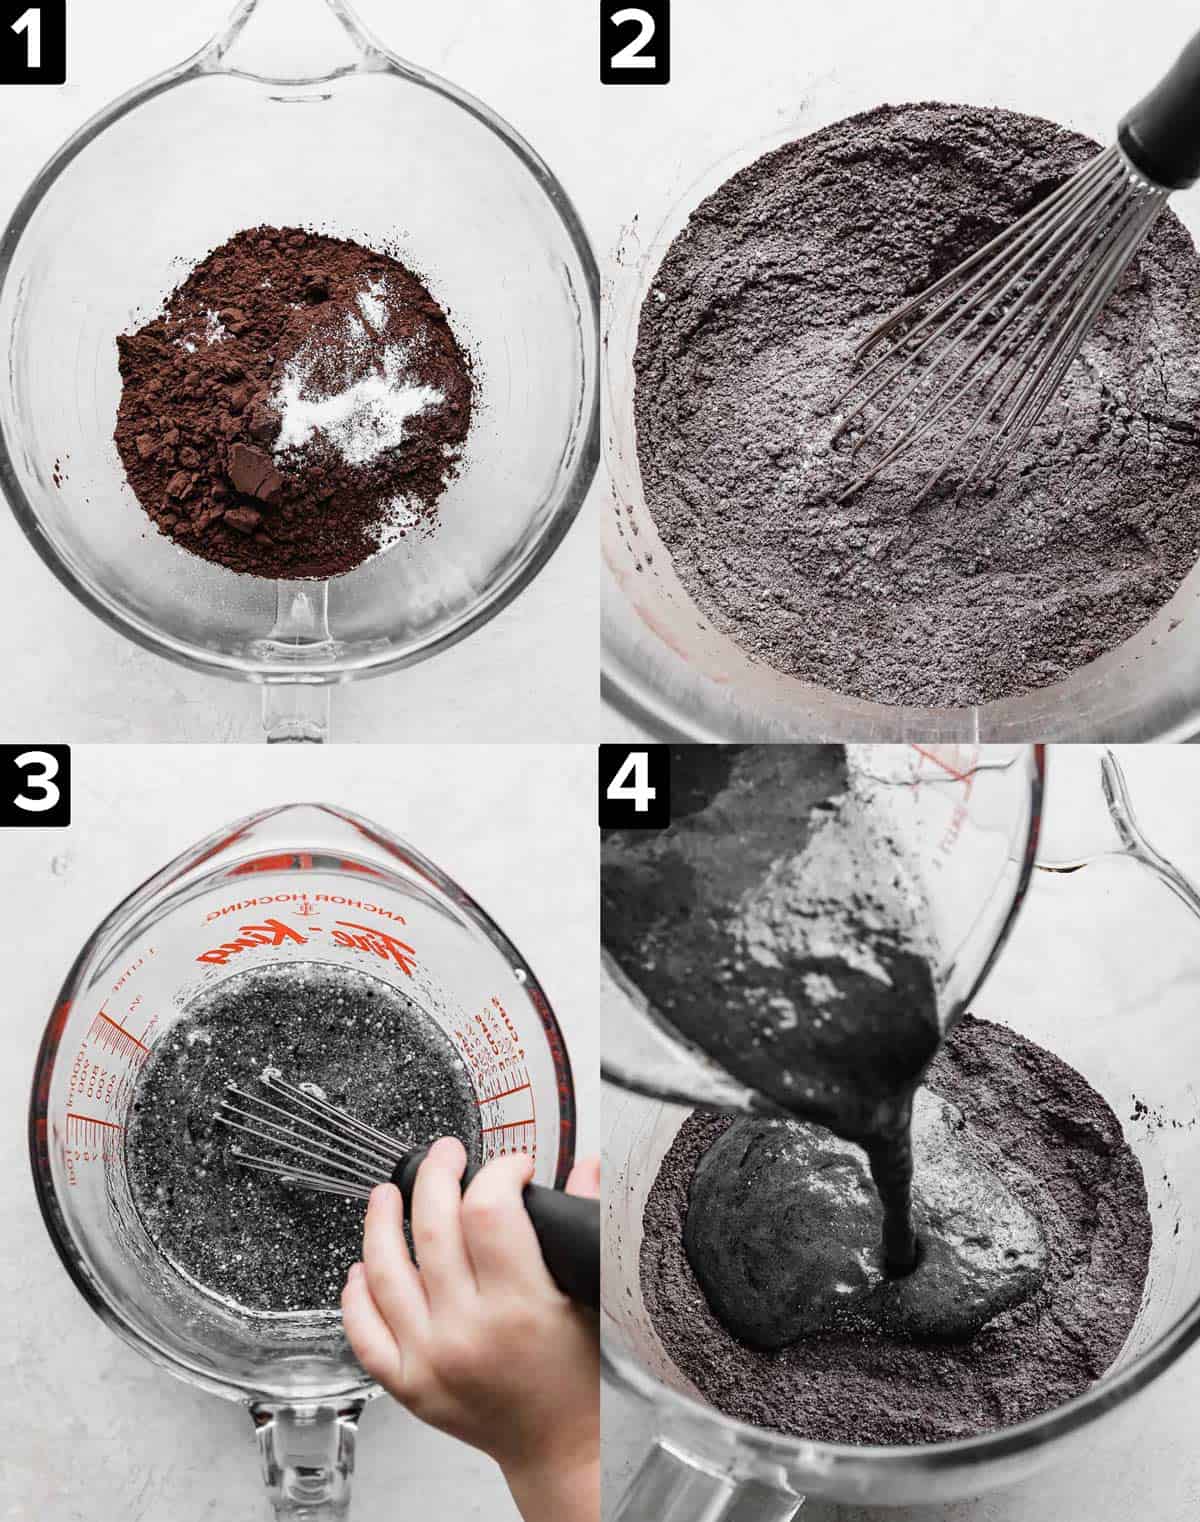 Four images showing the making of Oreo Cupcake batter, in a glass mixing bowl on a white background.